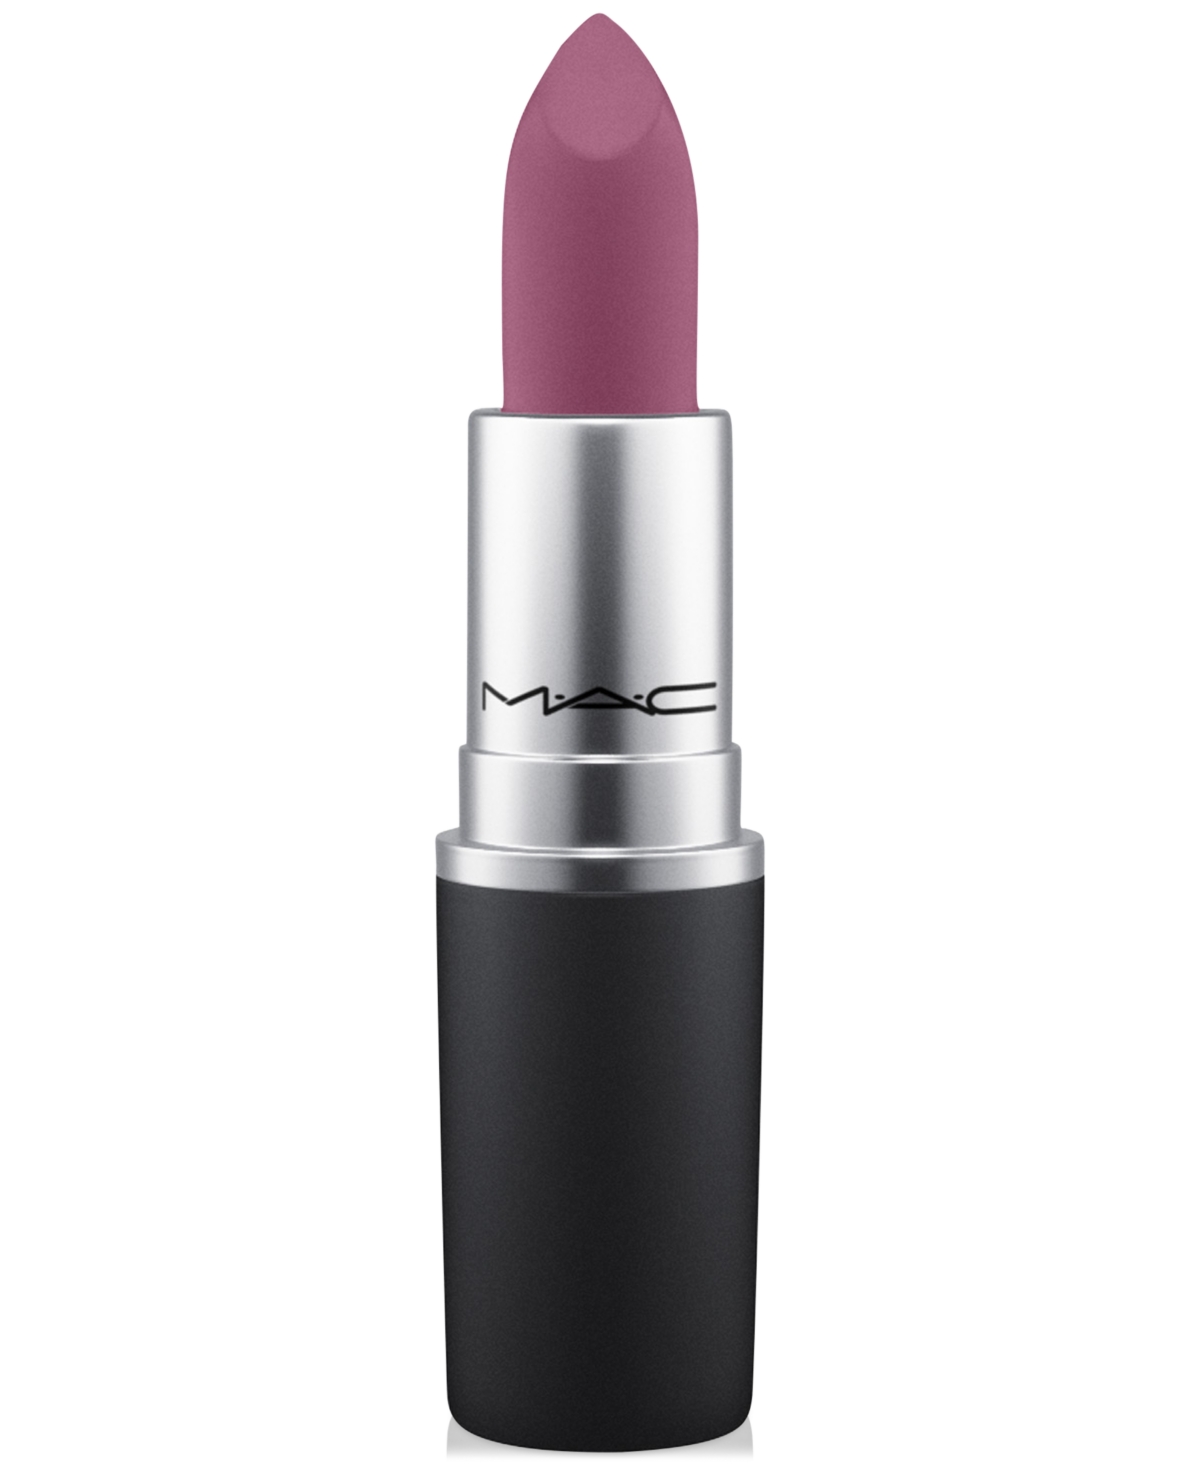 Mac Powder Kiss Lipstick In P For Potent (greyed Lavender)